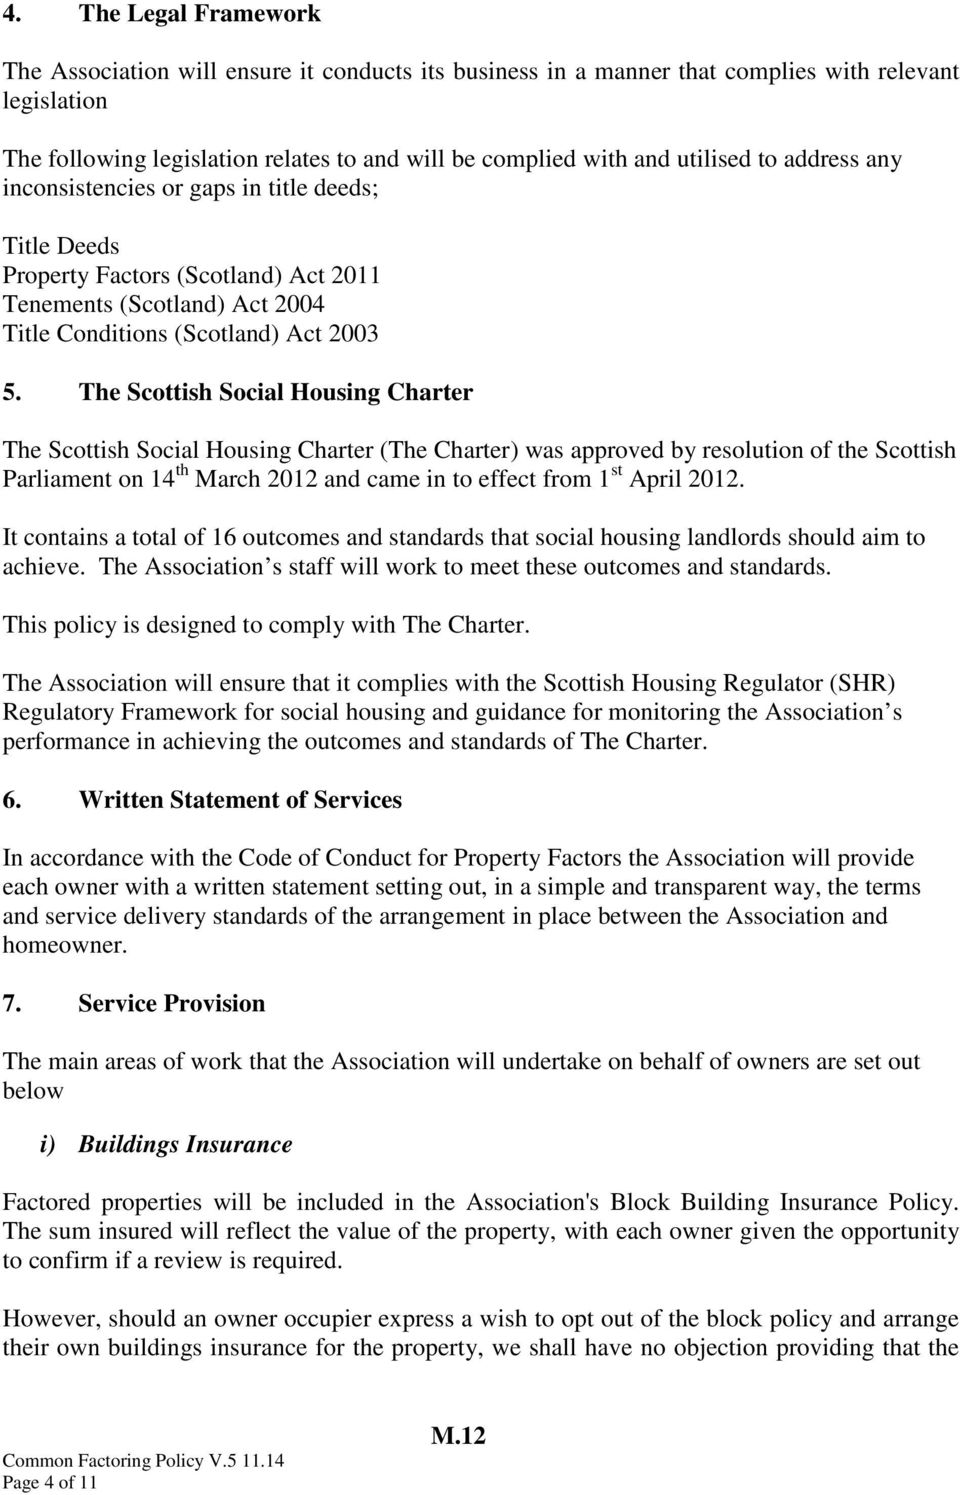 The Scottish Social Housing Charter The Scottish Social Housing Charter (The Charter) was approved by resolution of the Scottish Parliament on 14 th March 2012 and came in to effect from 1 st April